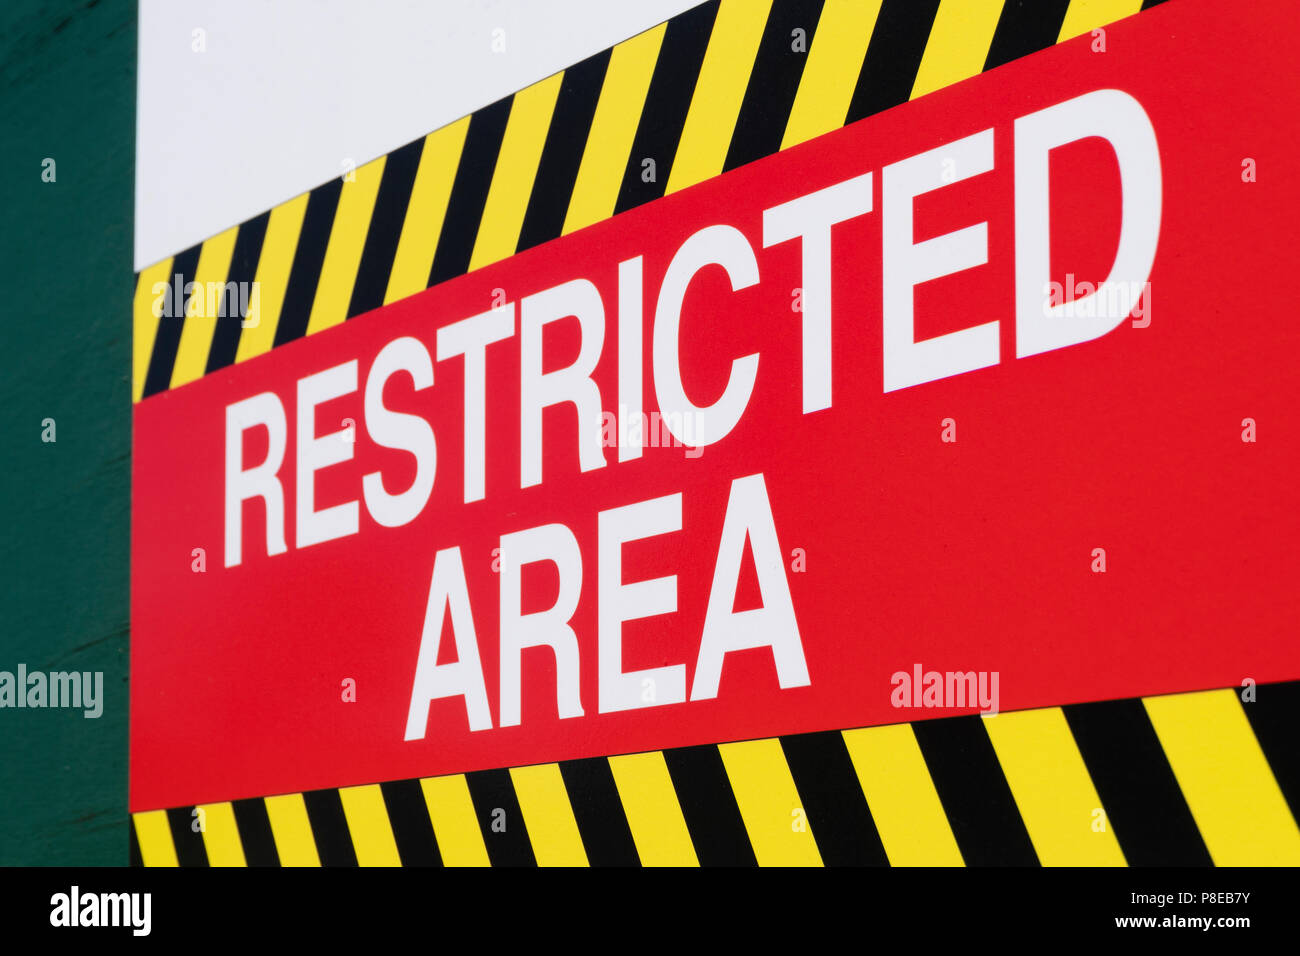 Restricted area sign Banque D'Images